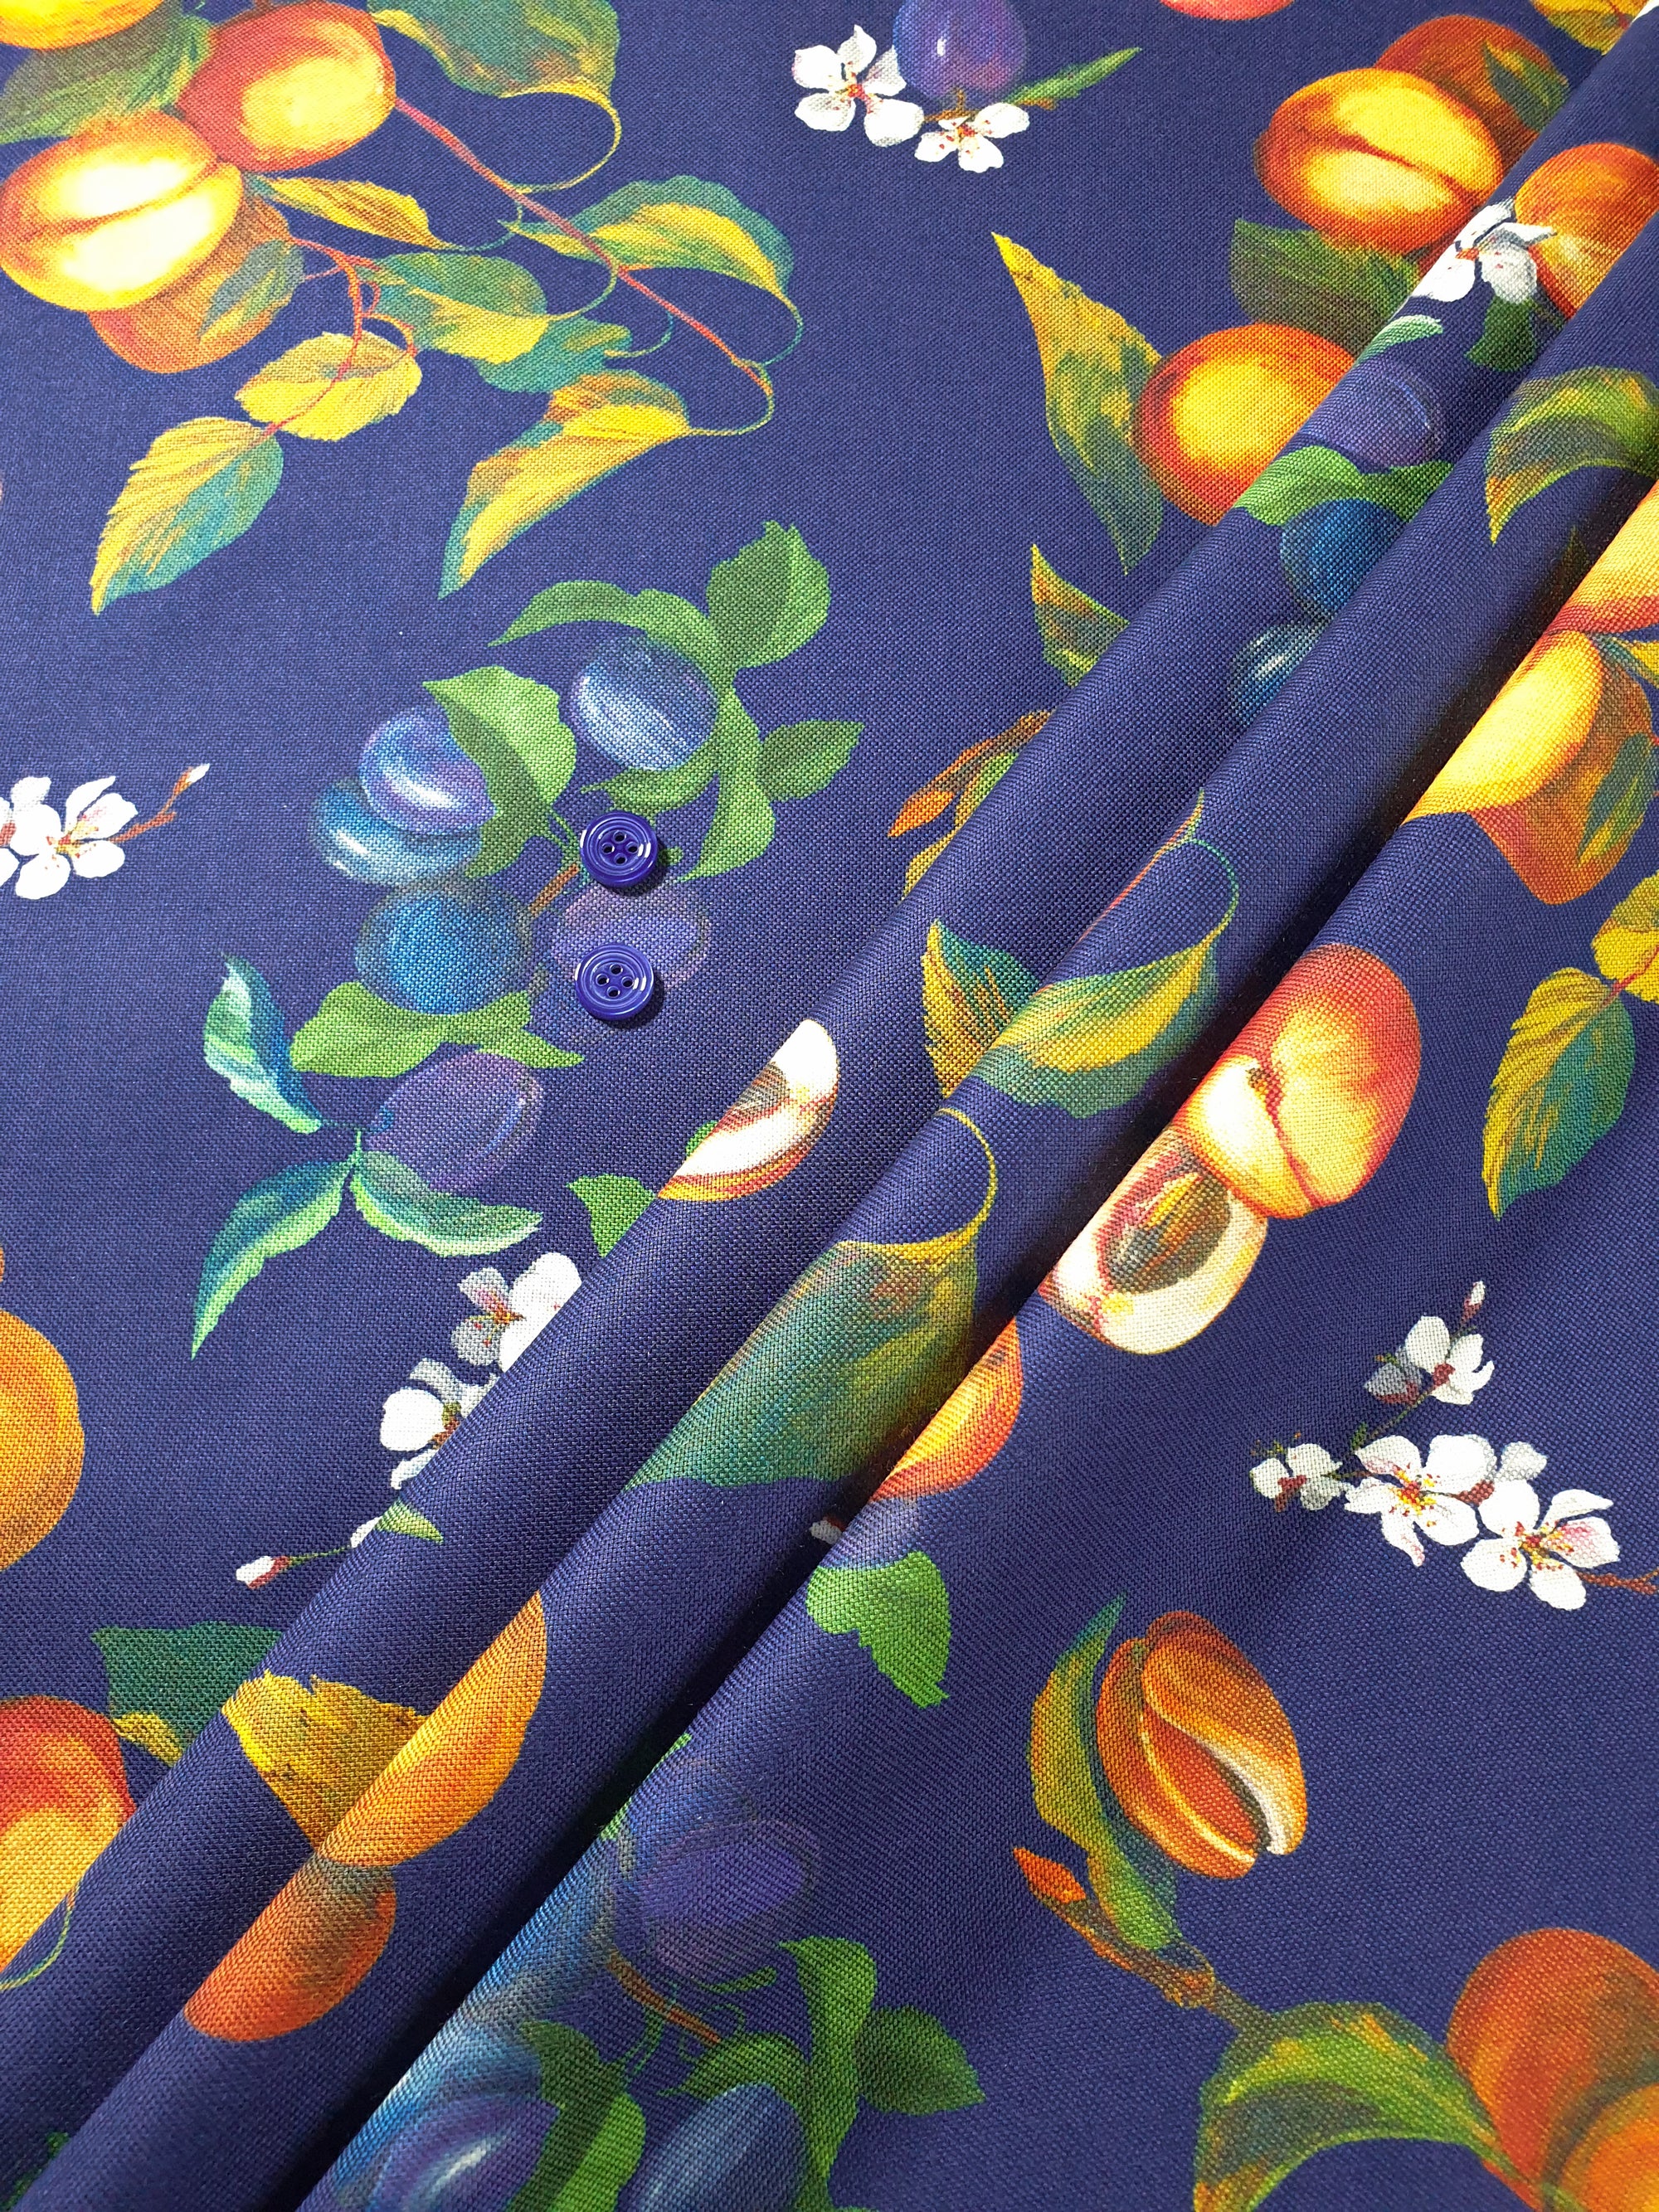 HUBERROSS 100% Oxford Panama Cotton Prints   Cloth Made In Italy  Width: 58'' / 150cm